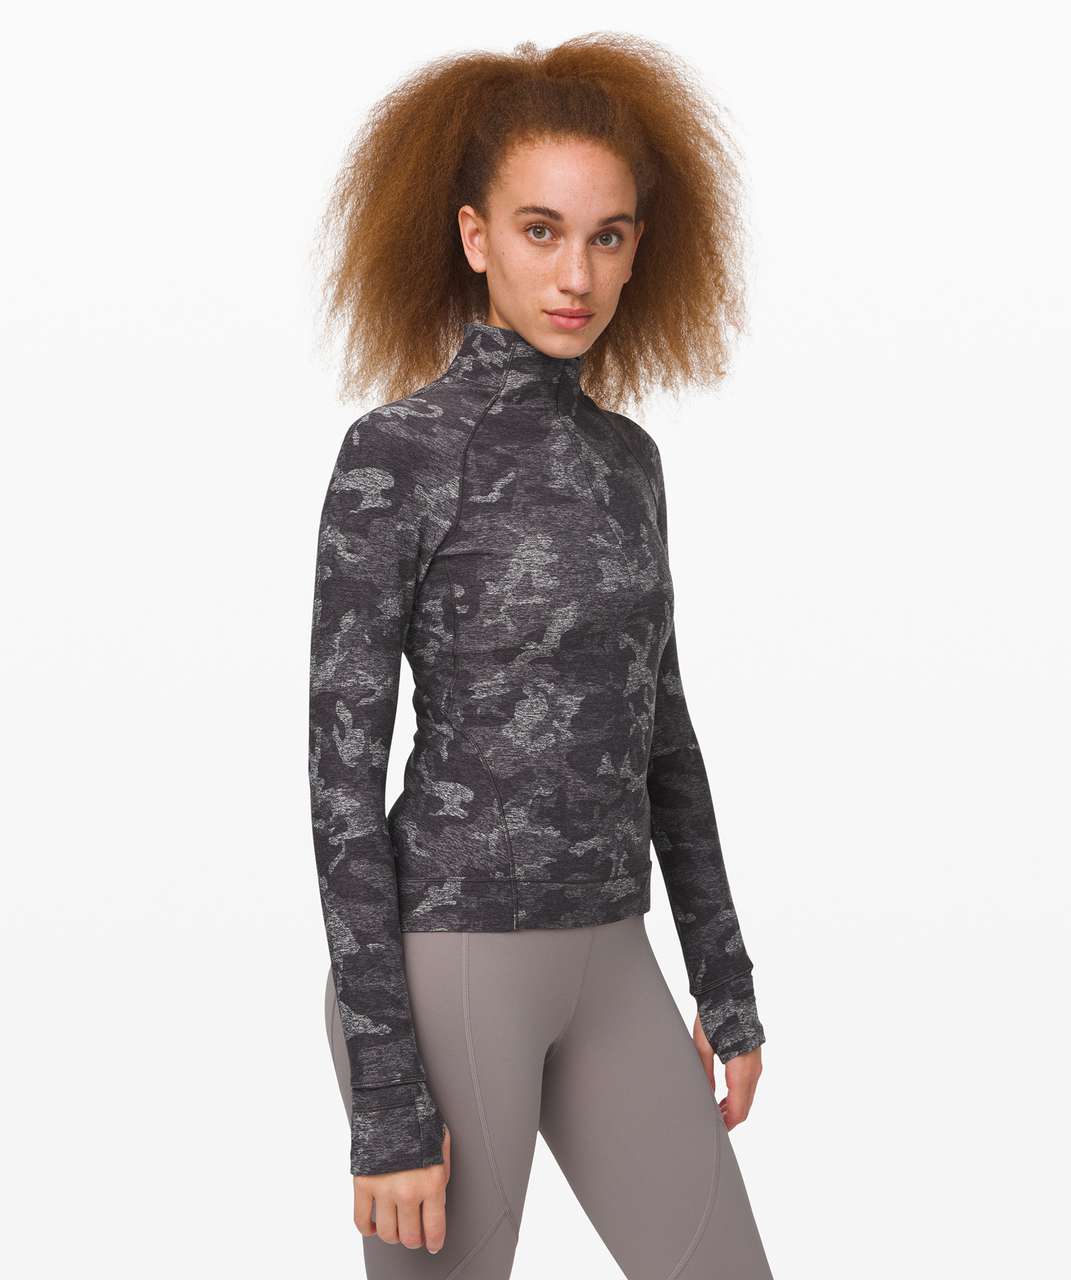 Lululemon Outrun the Elements 1/2 Zip - Incognito Camo HTR Black